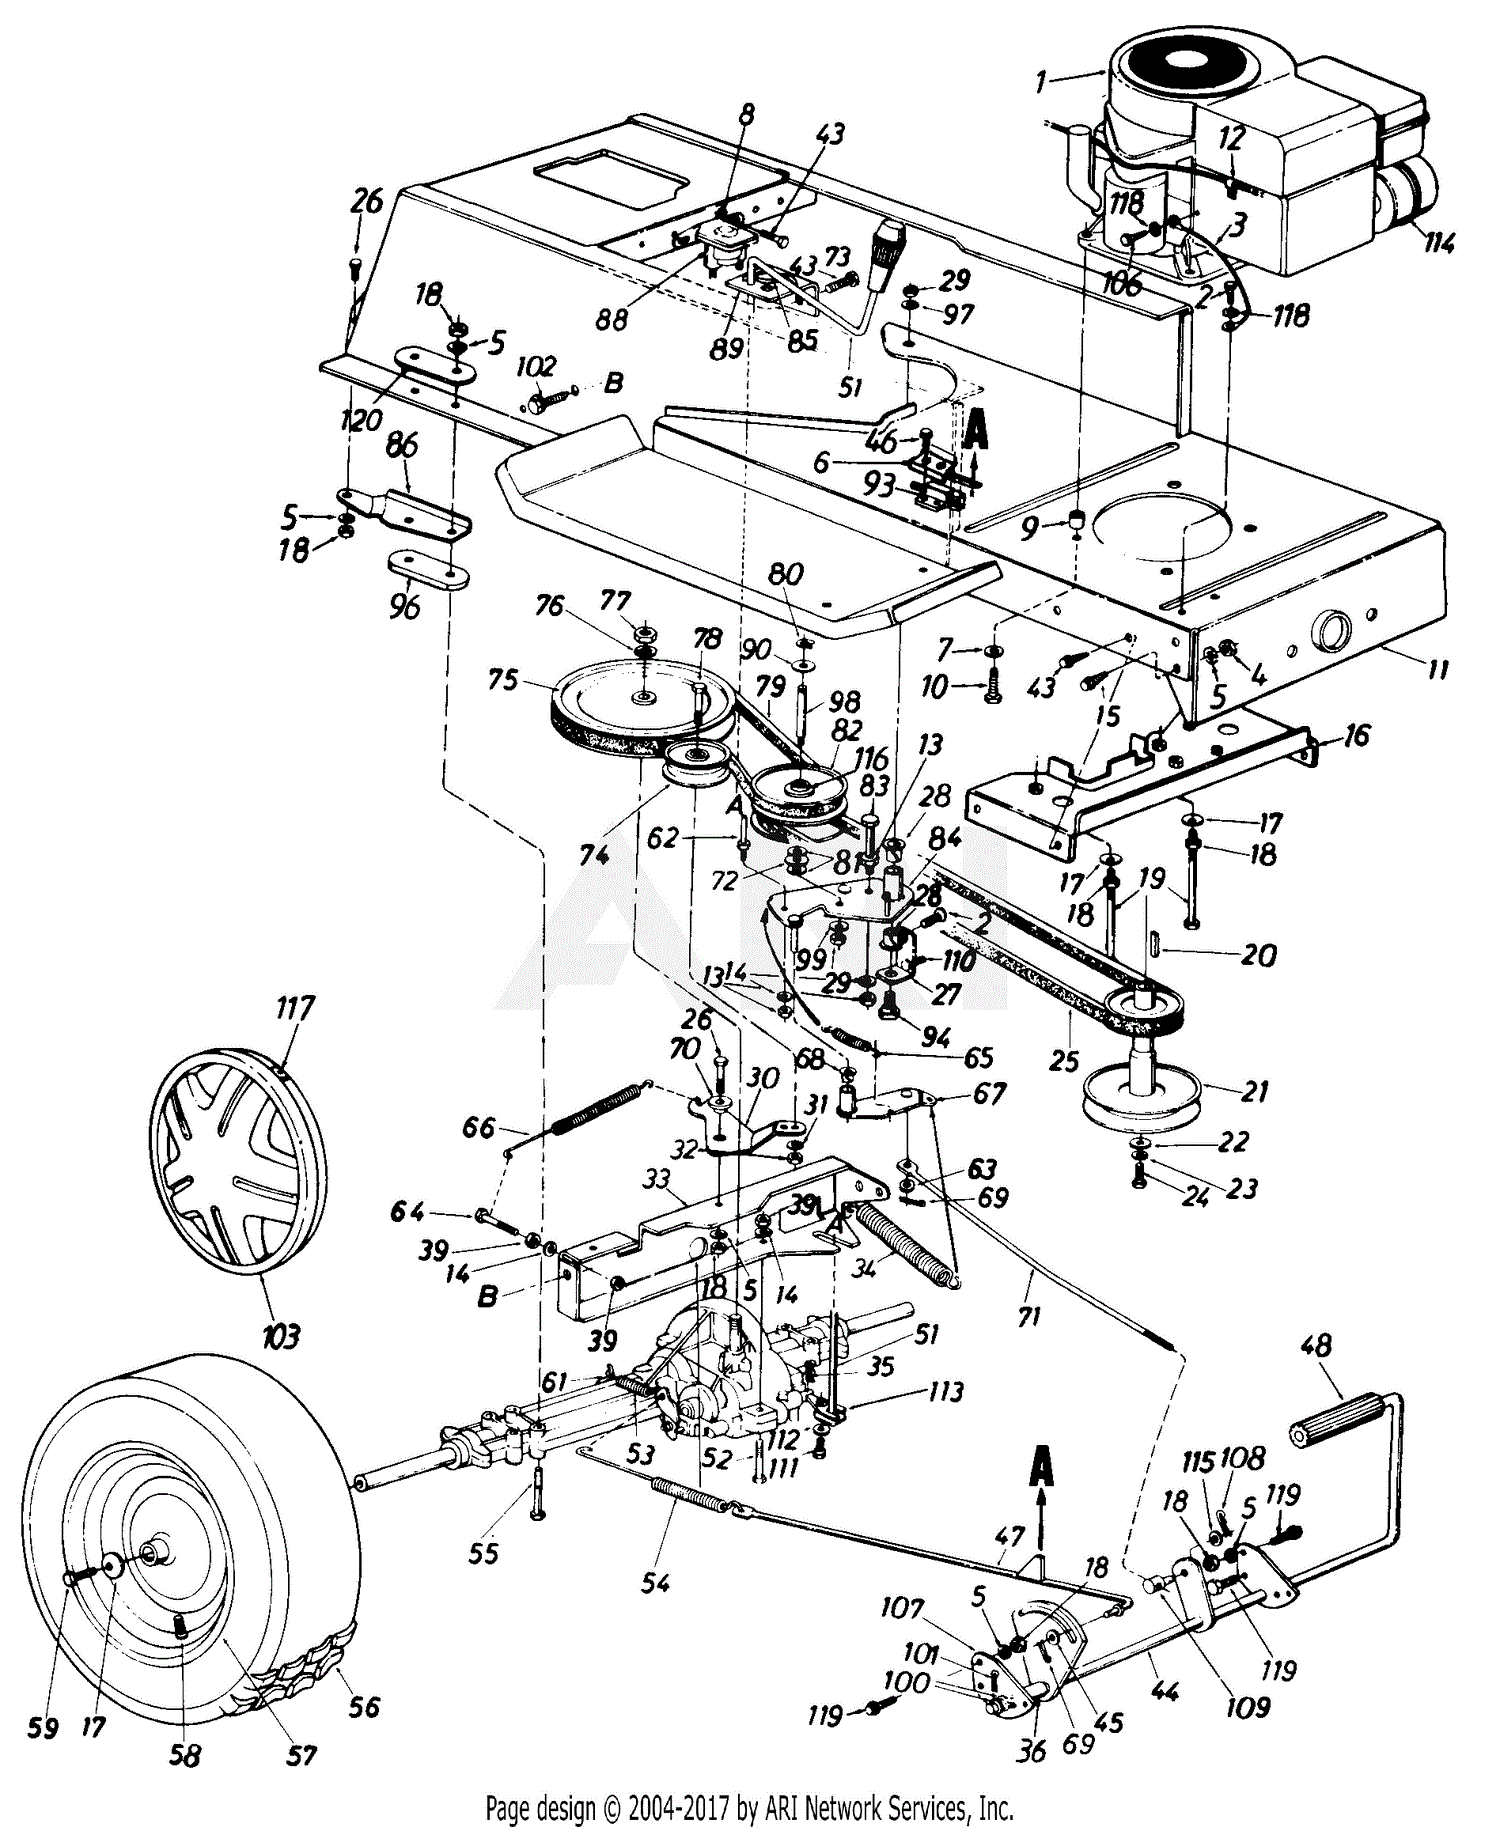 Wiring Diagram Mtd Lawn Tractor Wiring Diagram And By Mtd Lawn Mower